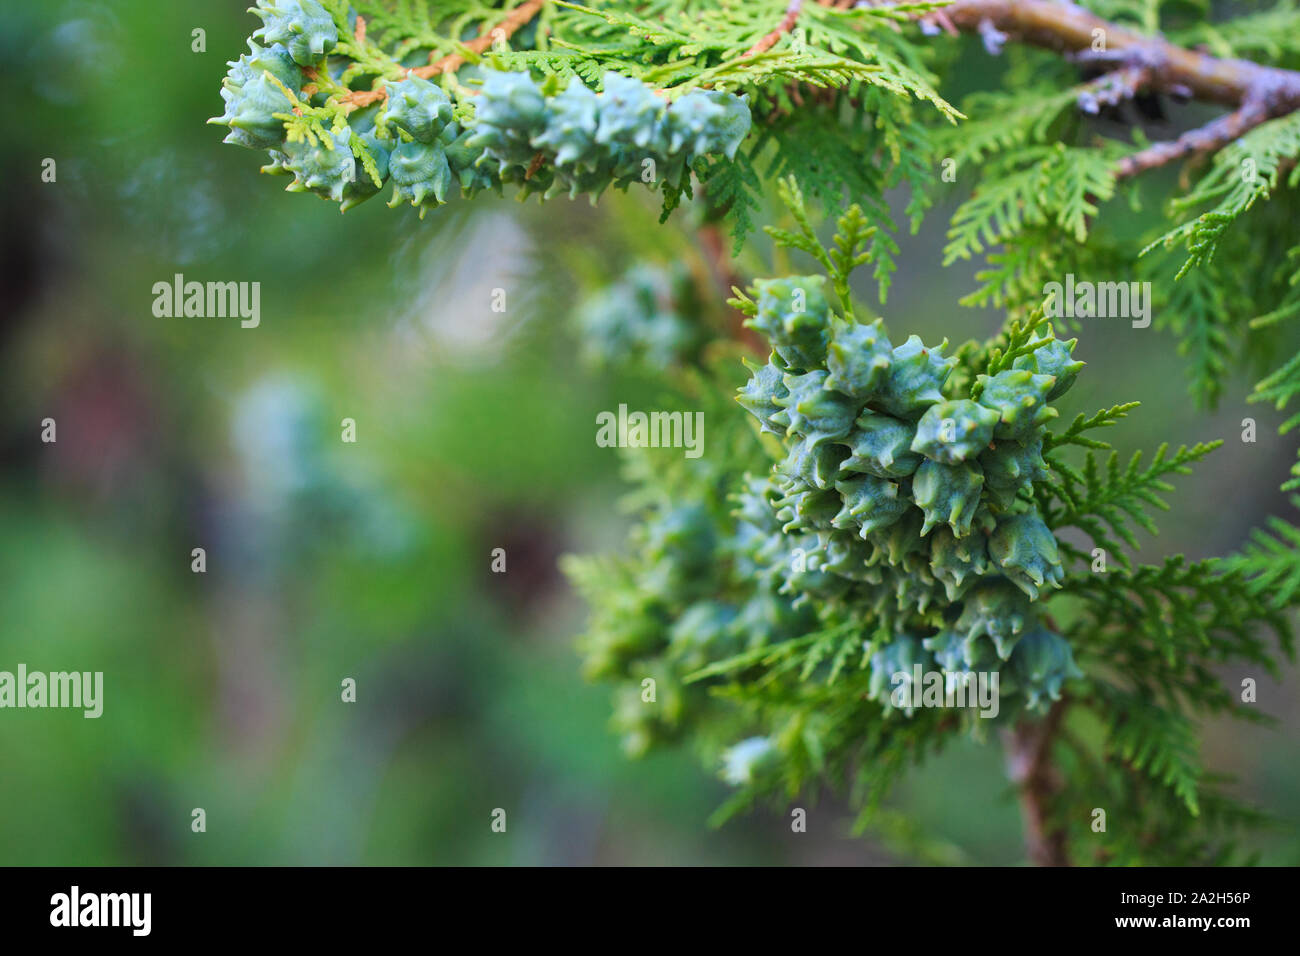 Green cones of thuja western on a branch, close-up. The botanical family of thuja is cupressaceae trees. Stock Photo